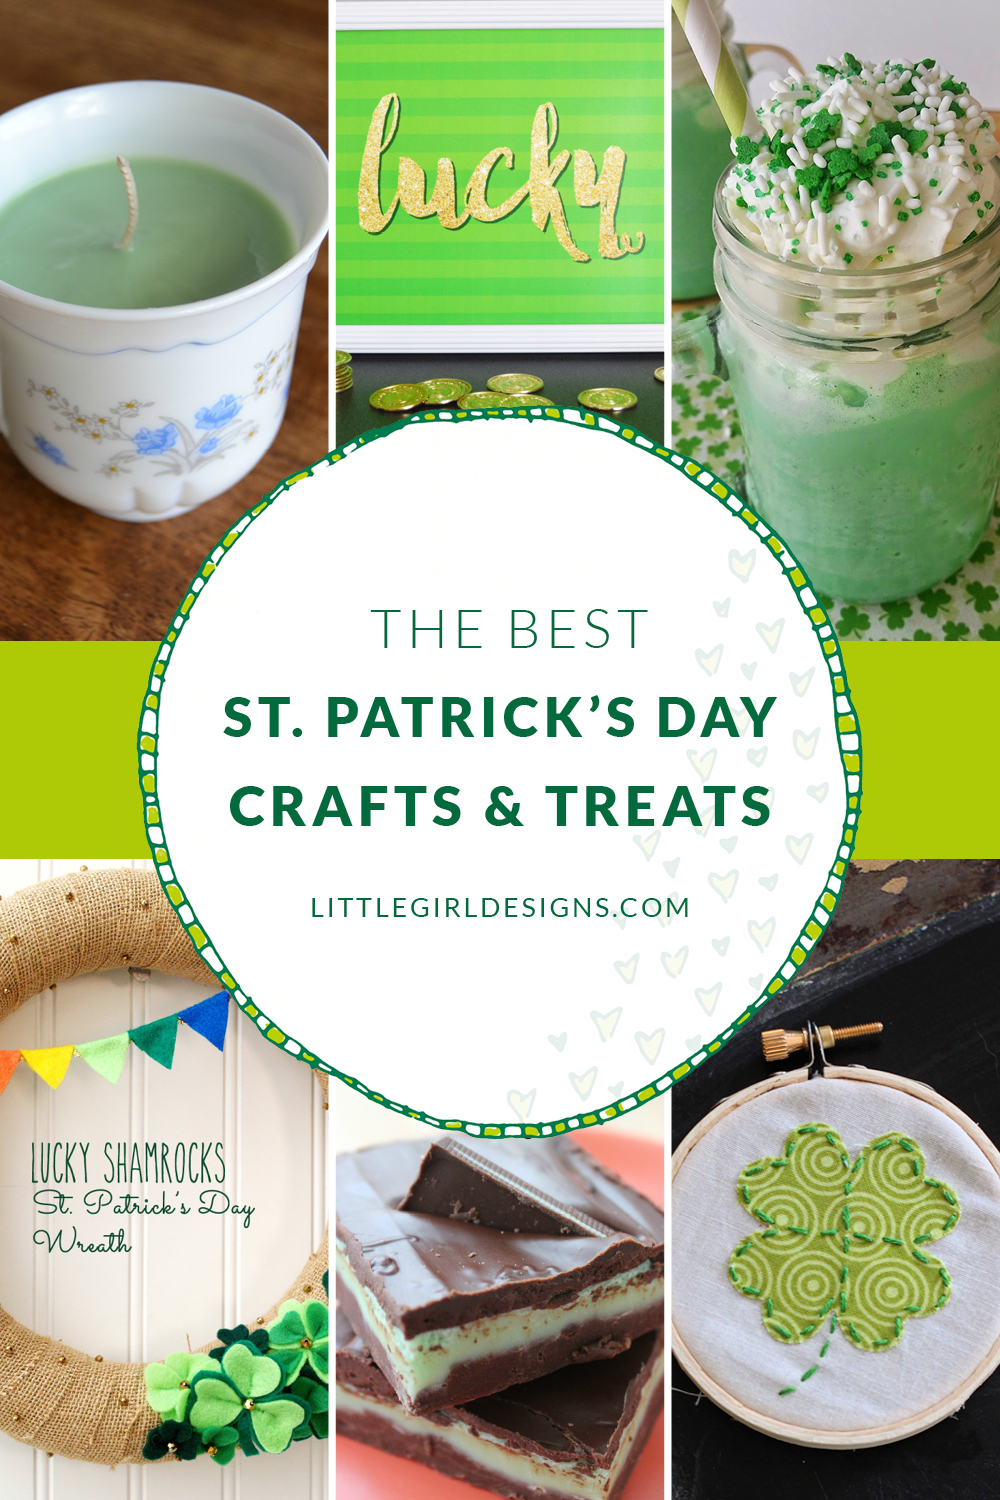 The Best St. Patrick’s Day Treats and Crafts